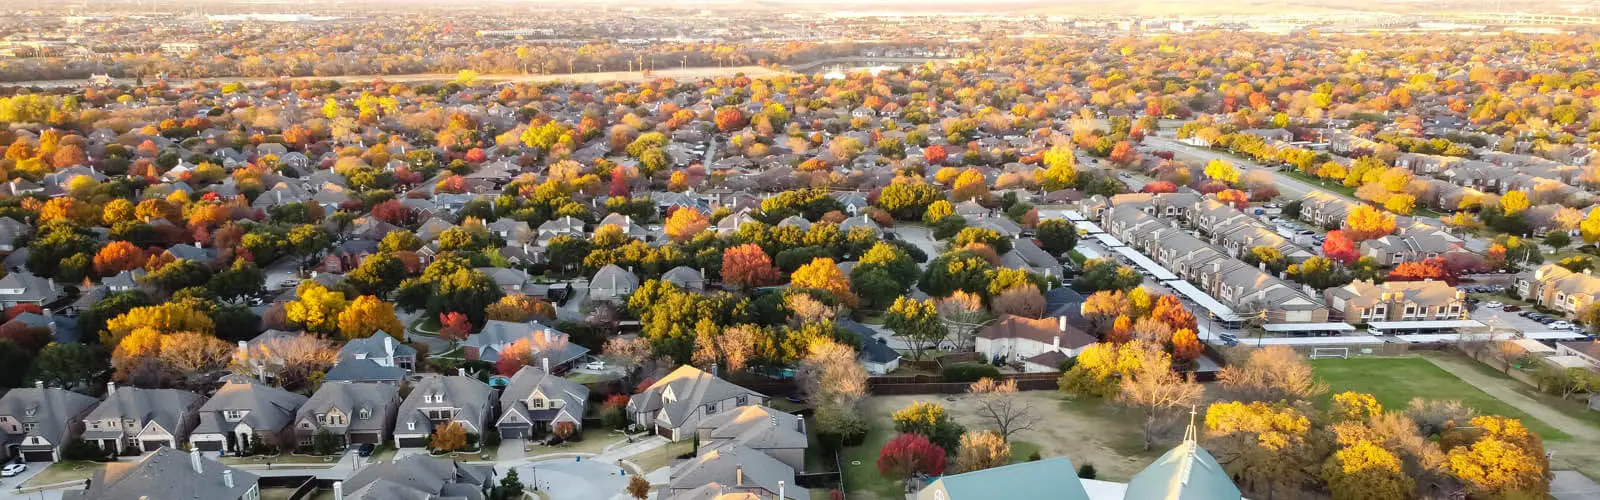 Coppell Texas Aerial View